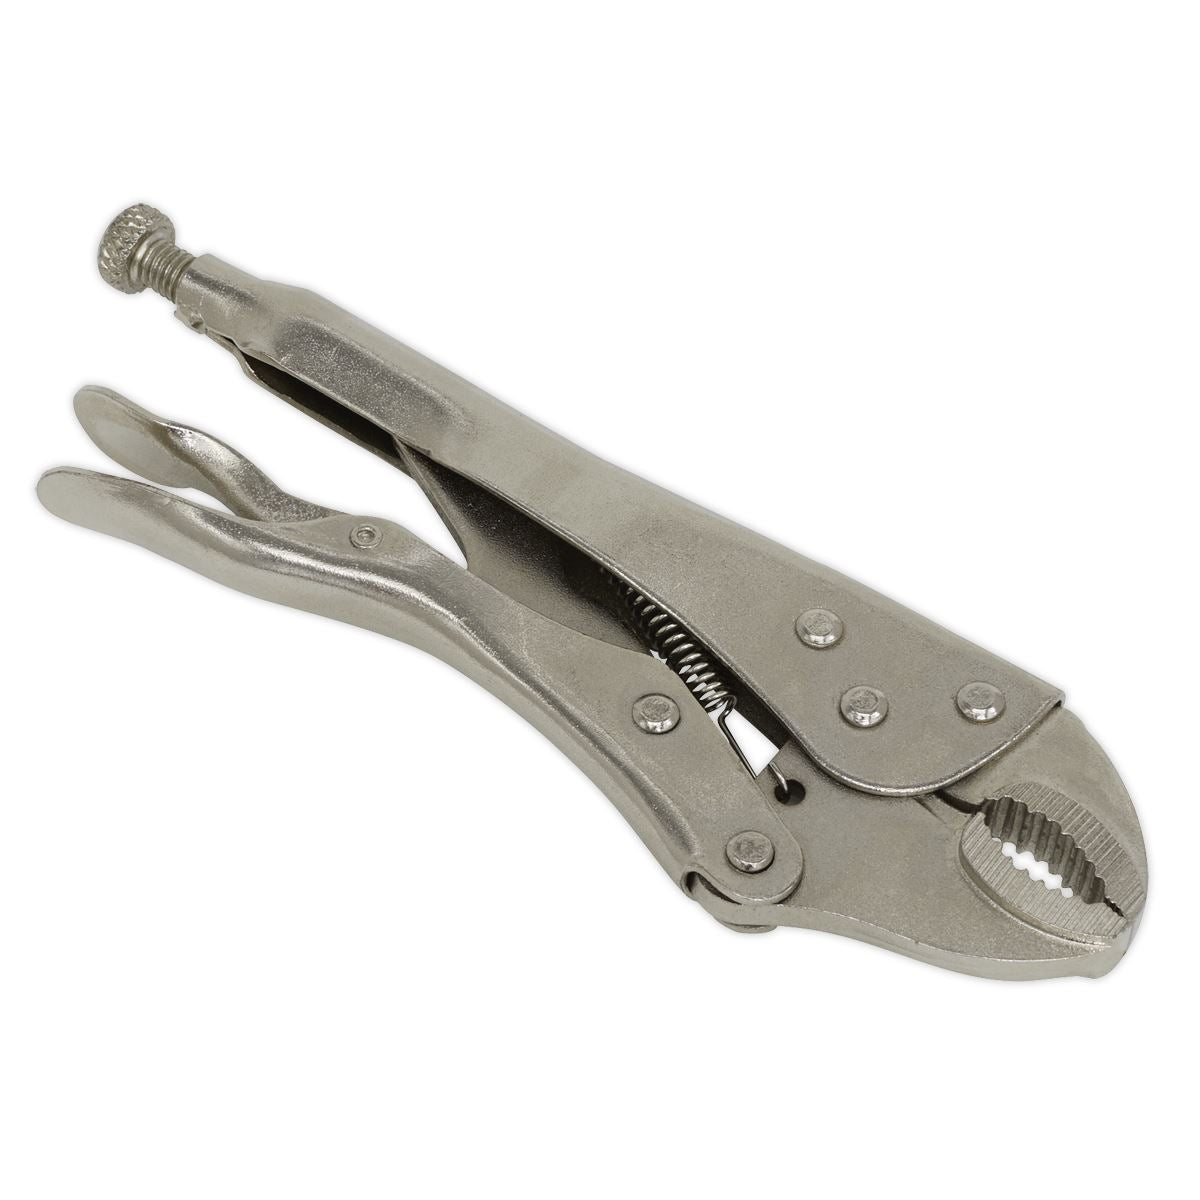 Siegen by Sealey Locking Pliers 175mm Curved Jaw